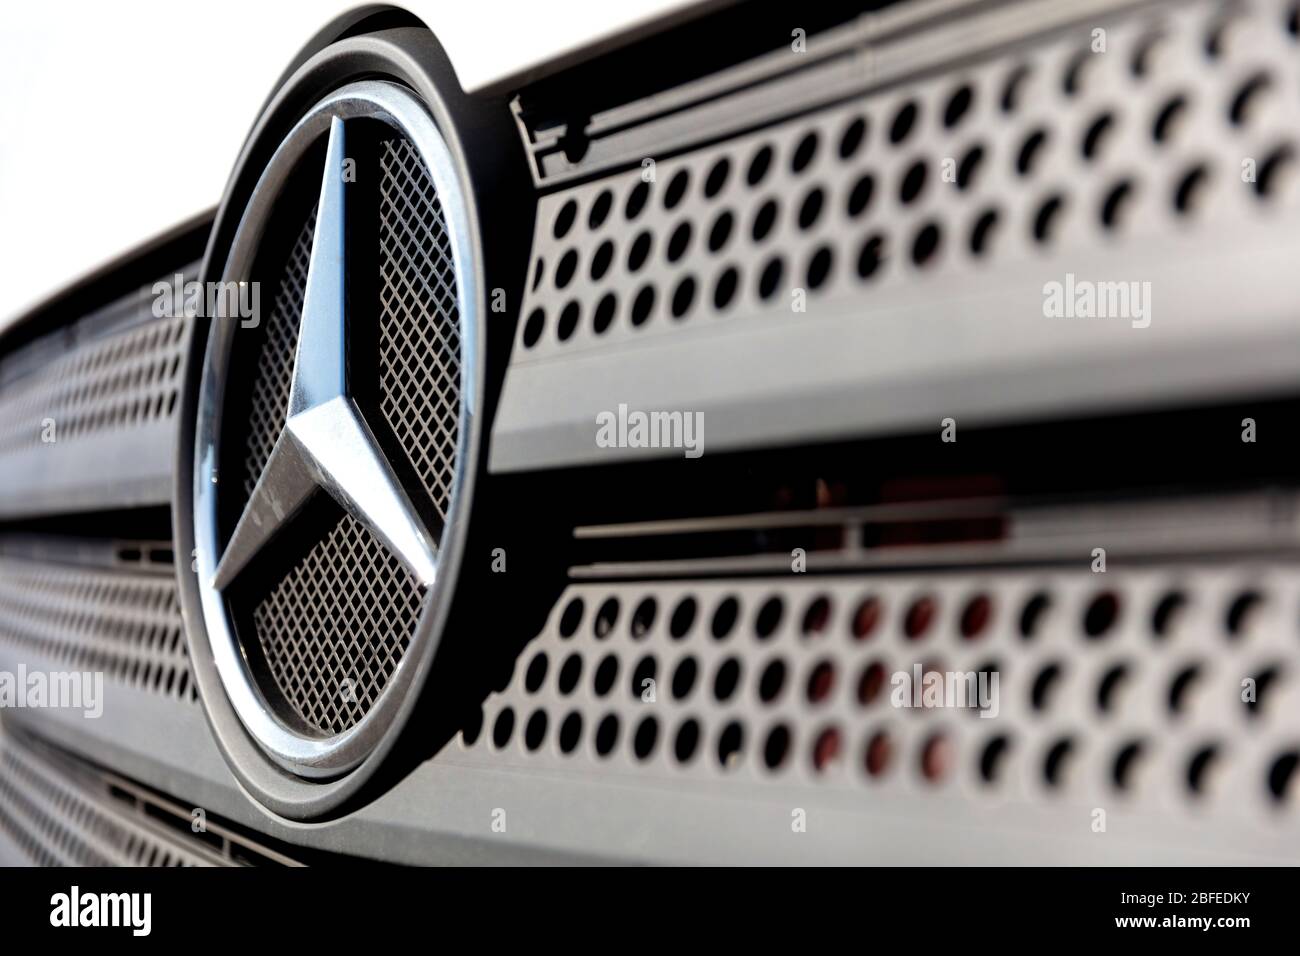 Mercedes-Benz logo at the grill of an Atego truck. Mercedes-Benz is a German global automobile marque and a division of Daimler AG. Stock Photo